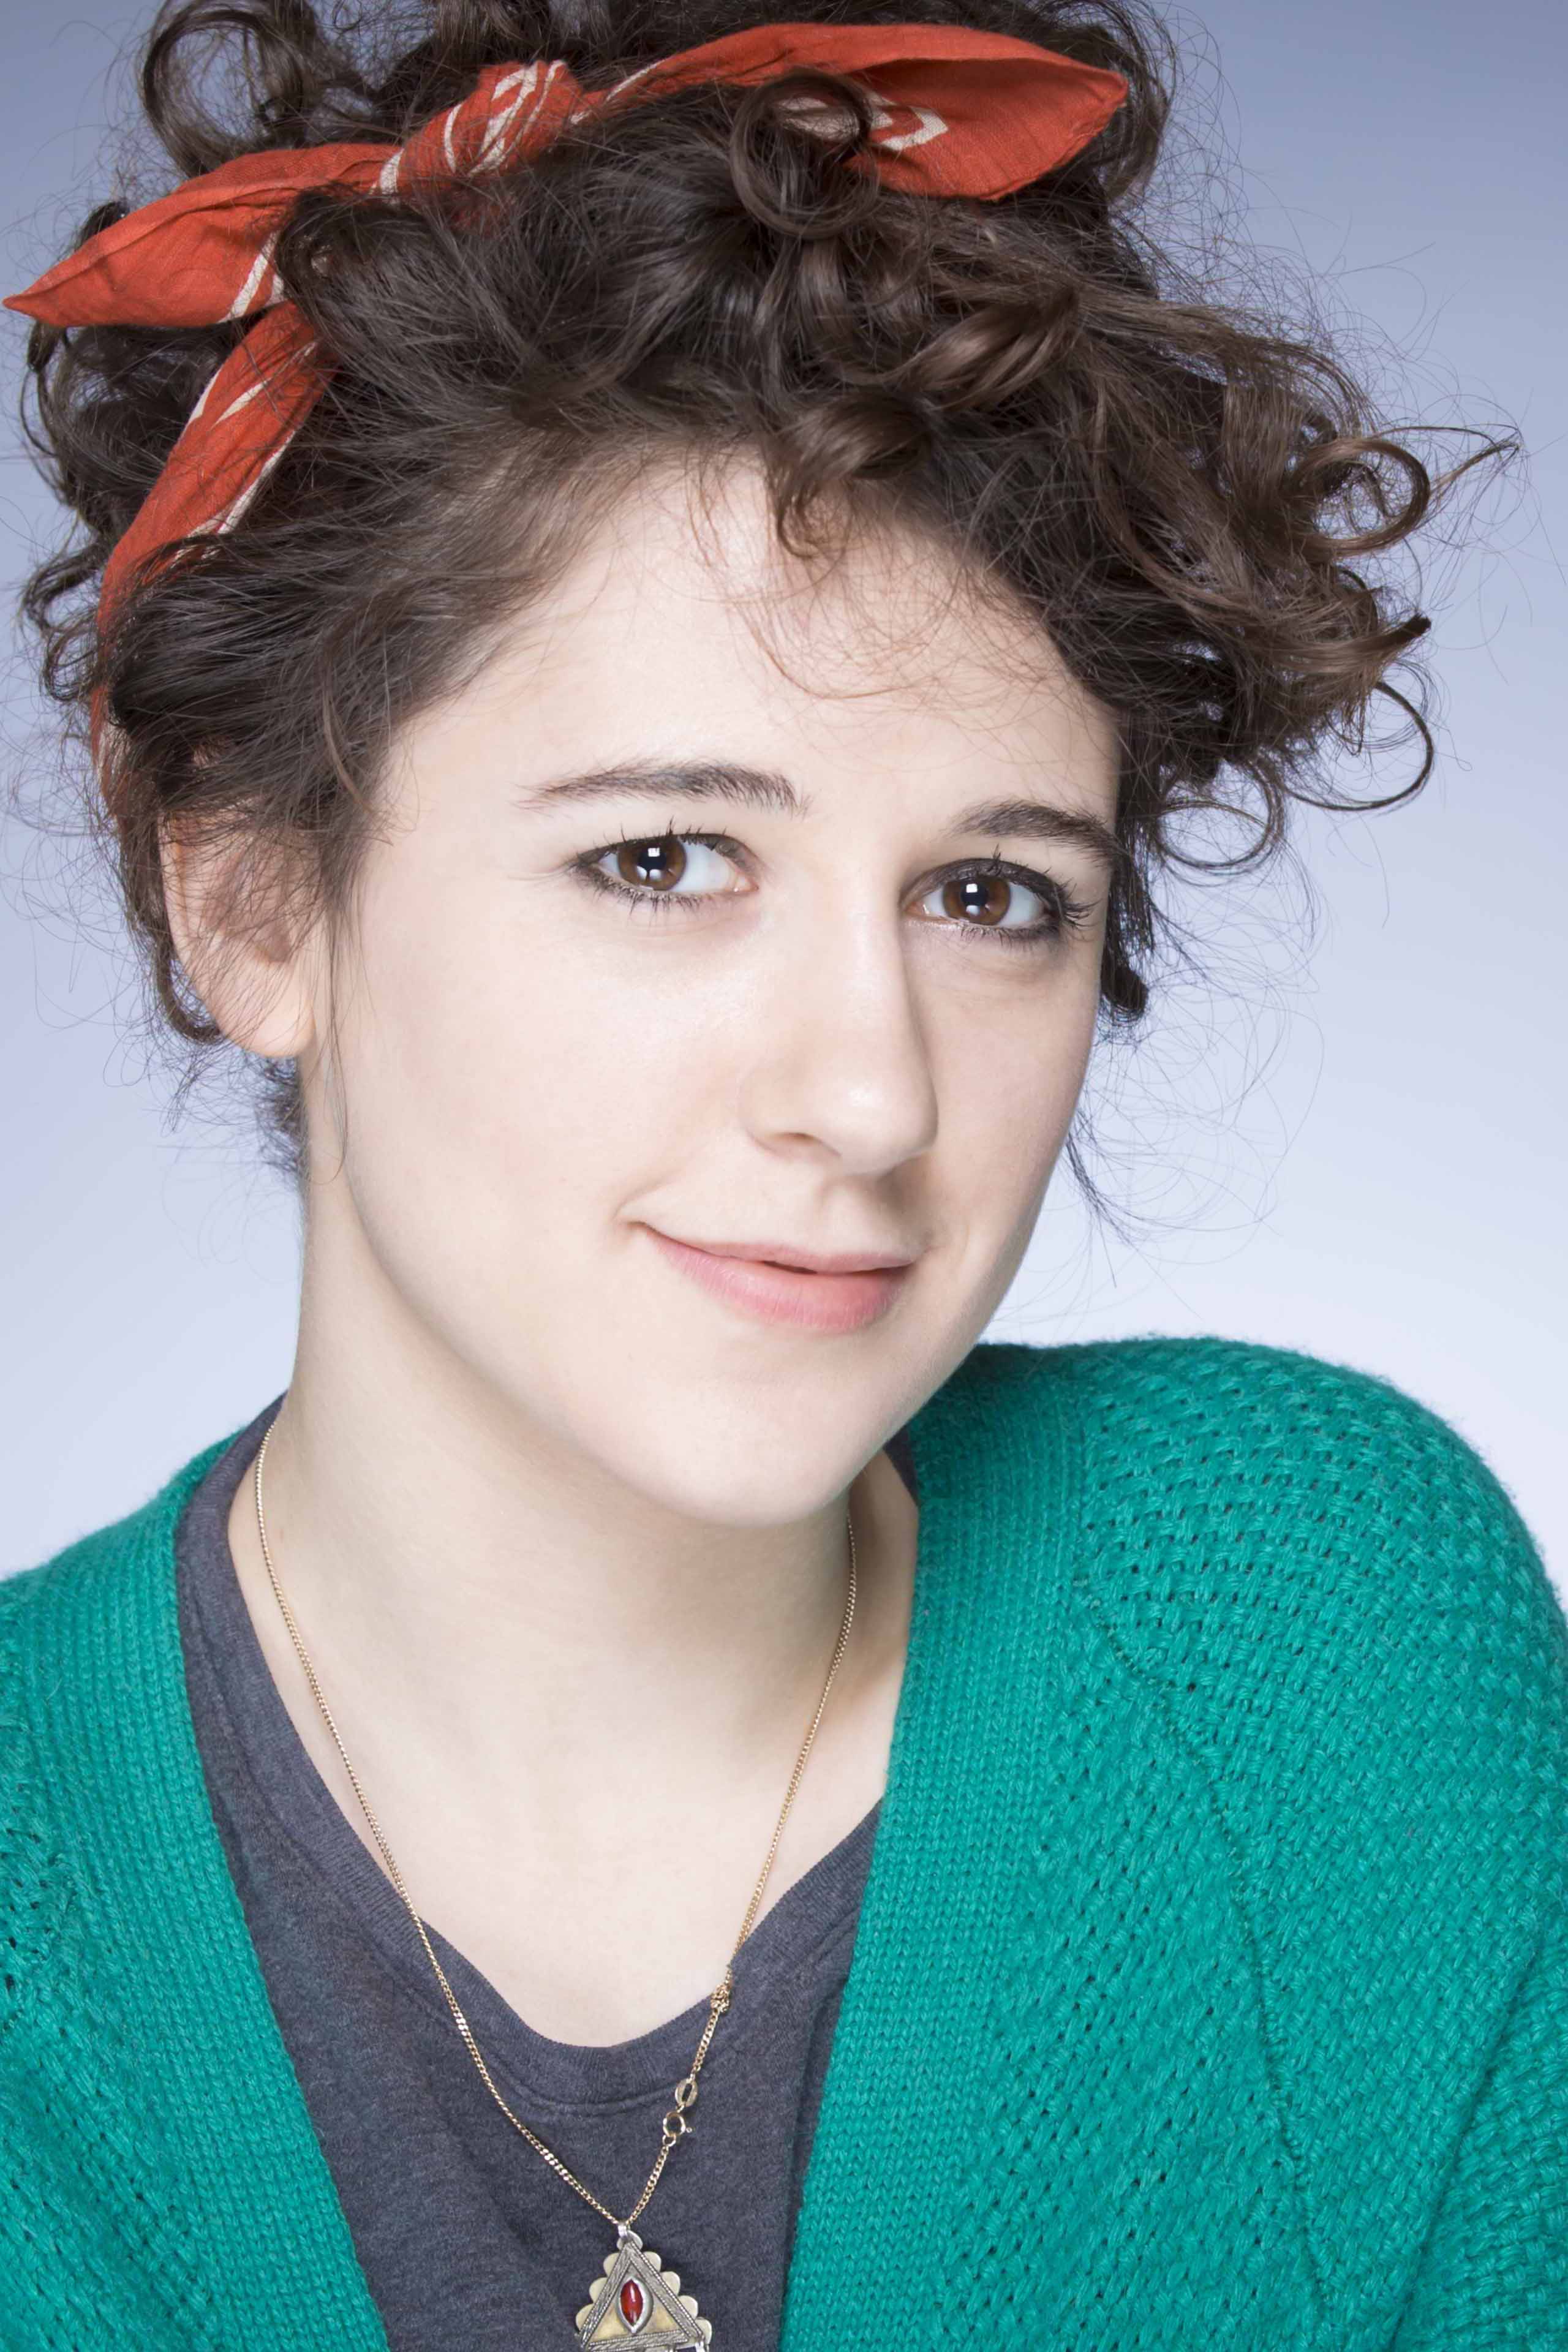 The 33-year old daughter of father (?) and mother(?) Ellie Kendrick in 2024 photo. Ellie Kendrick earned a  million dollar salary - leaving the net worth at  million in 2024